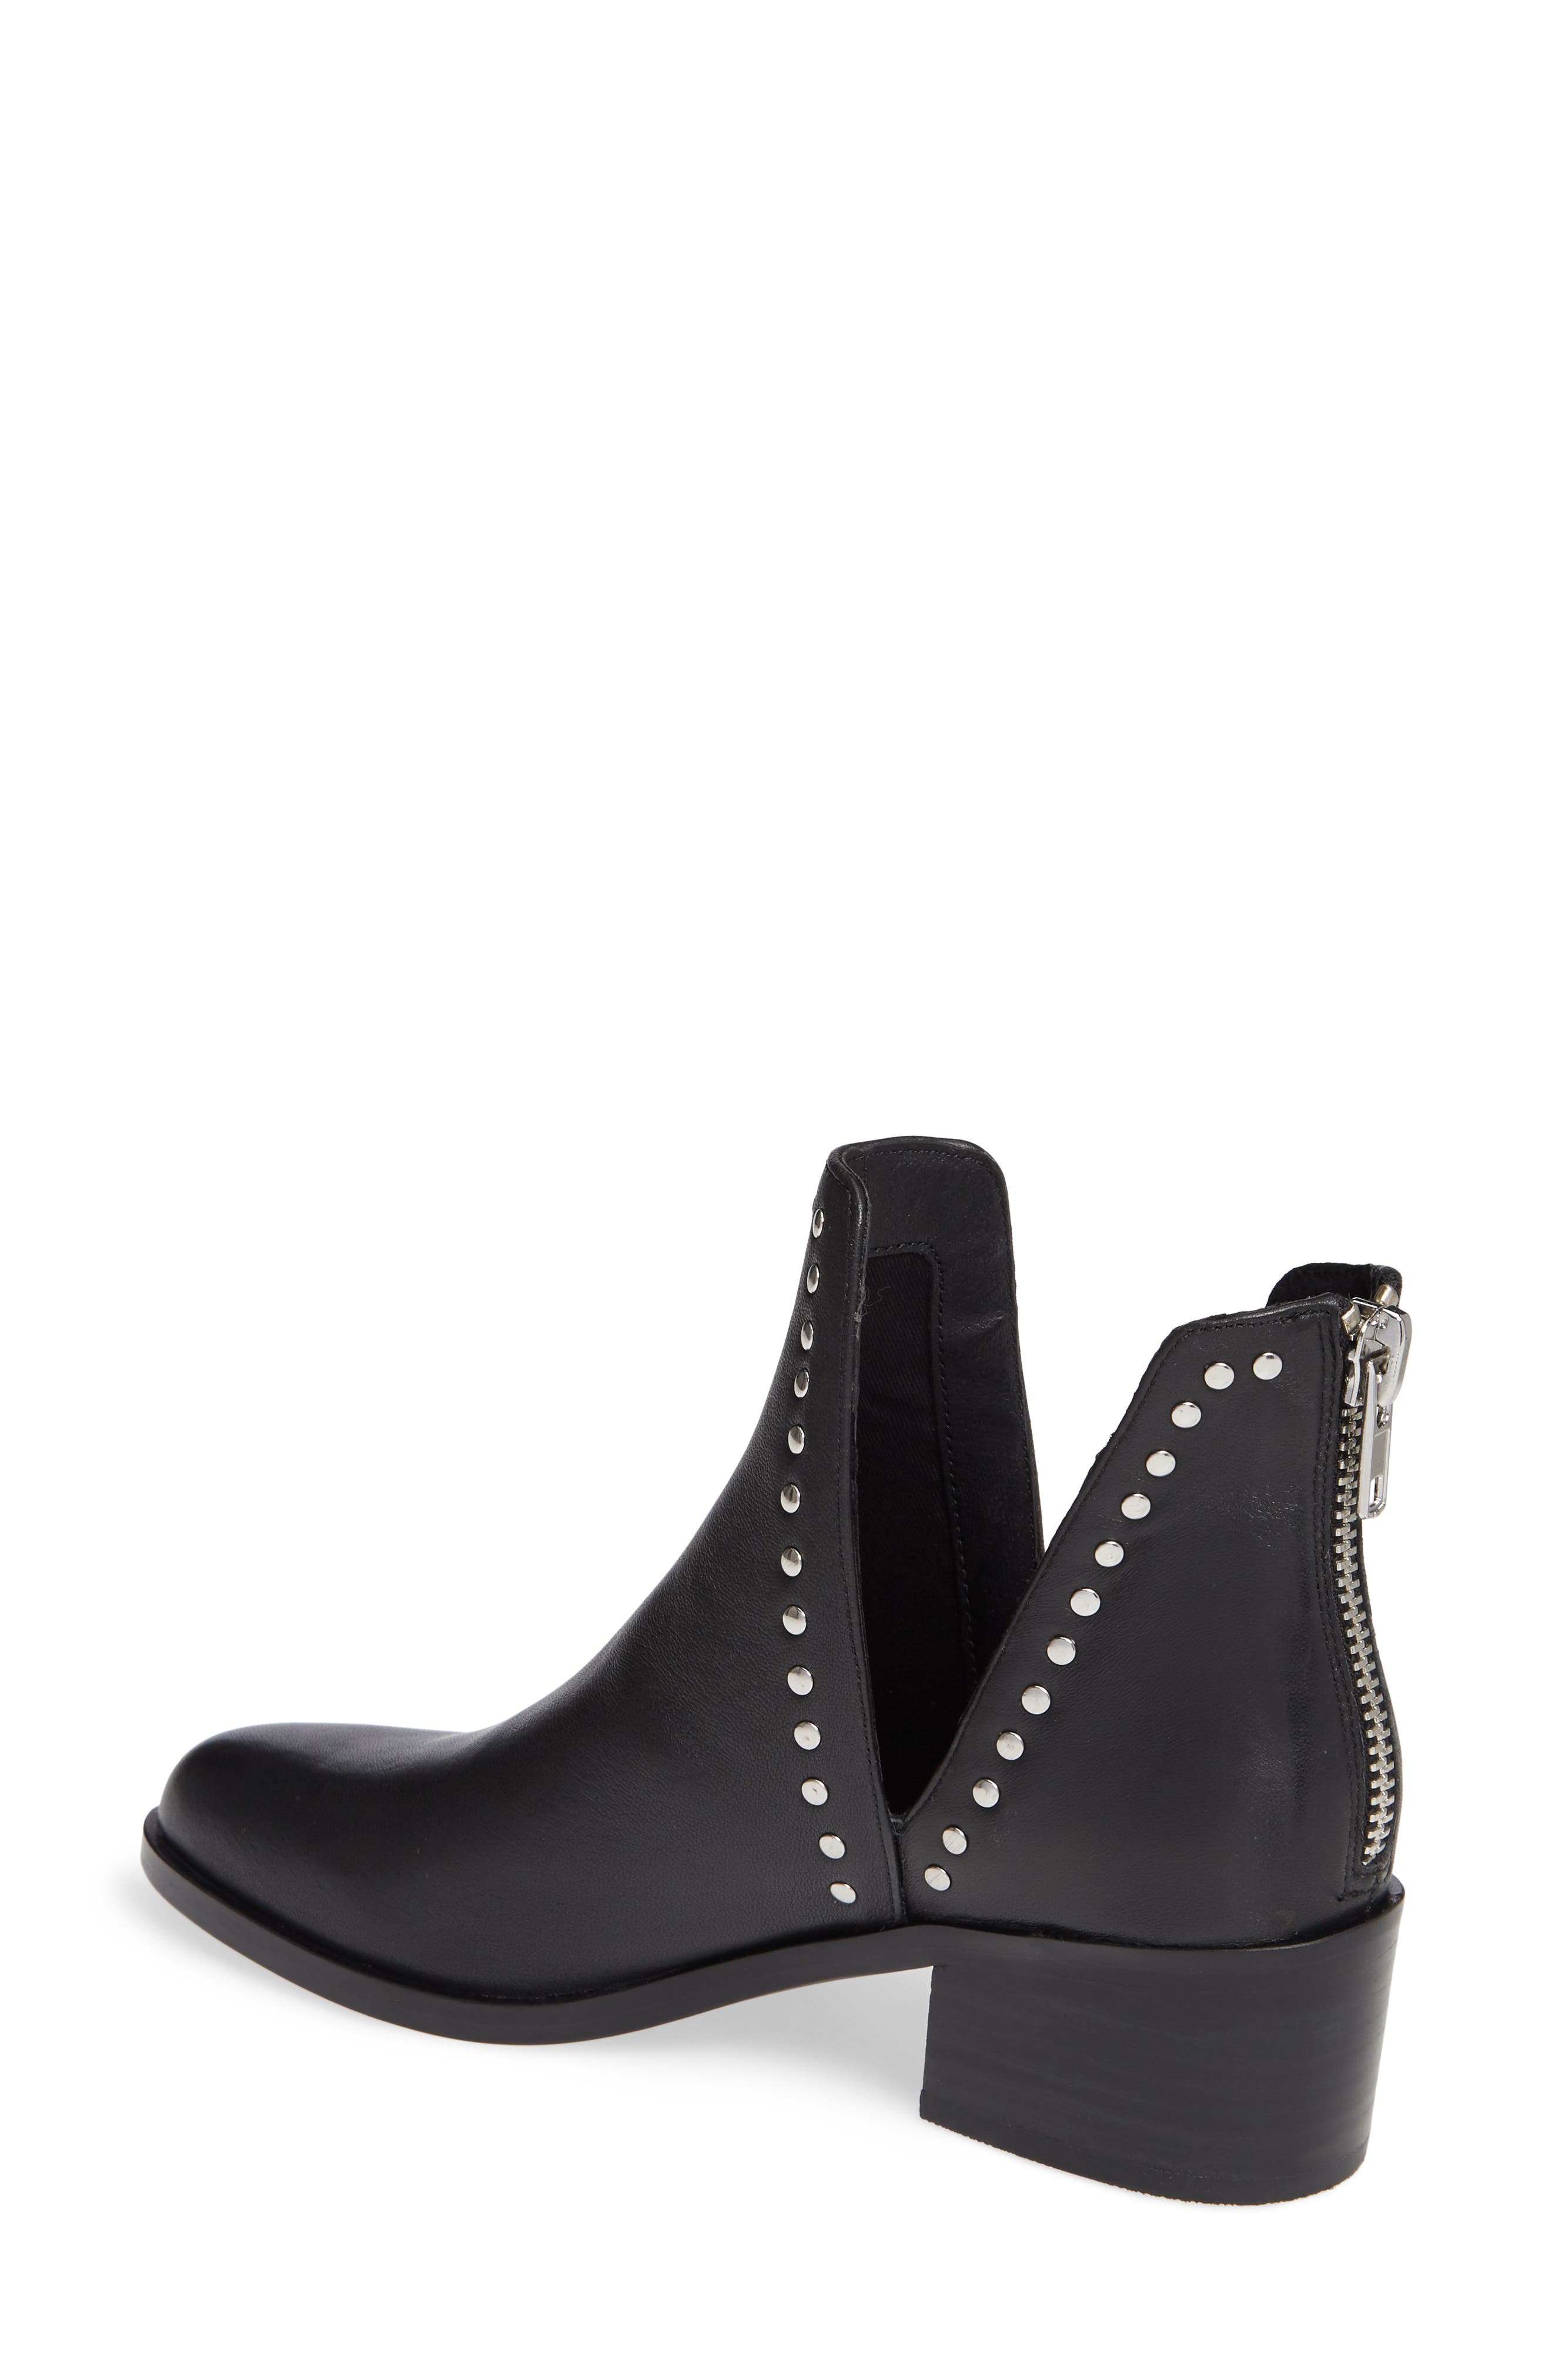 steve madden conquest